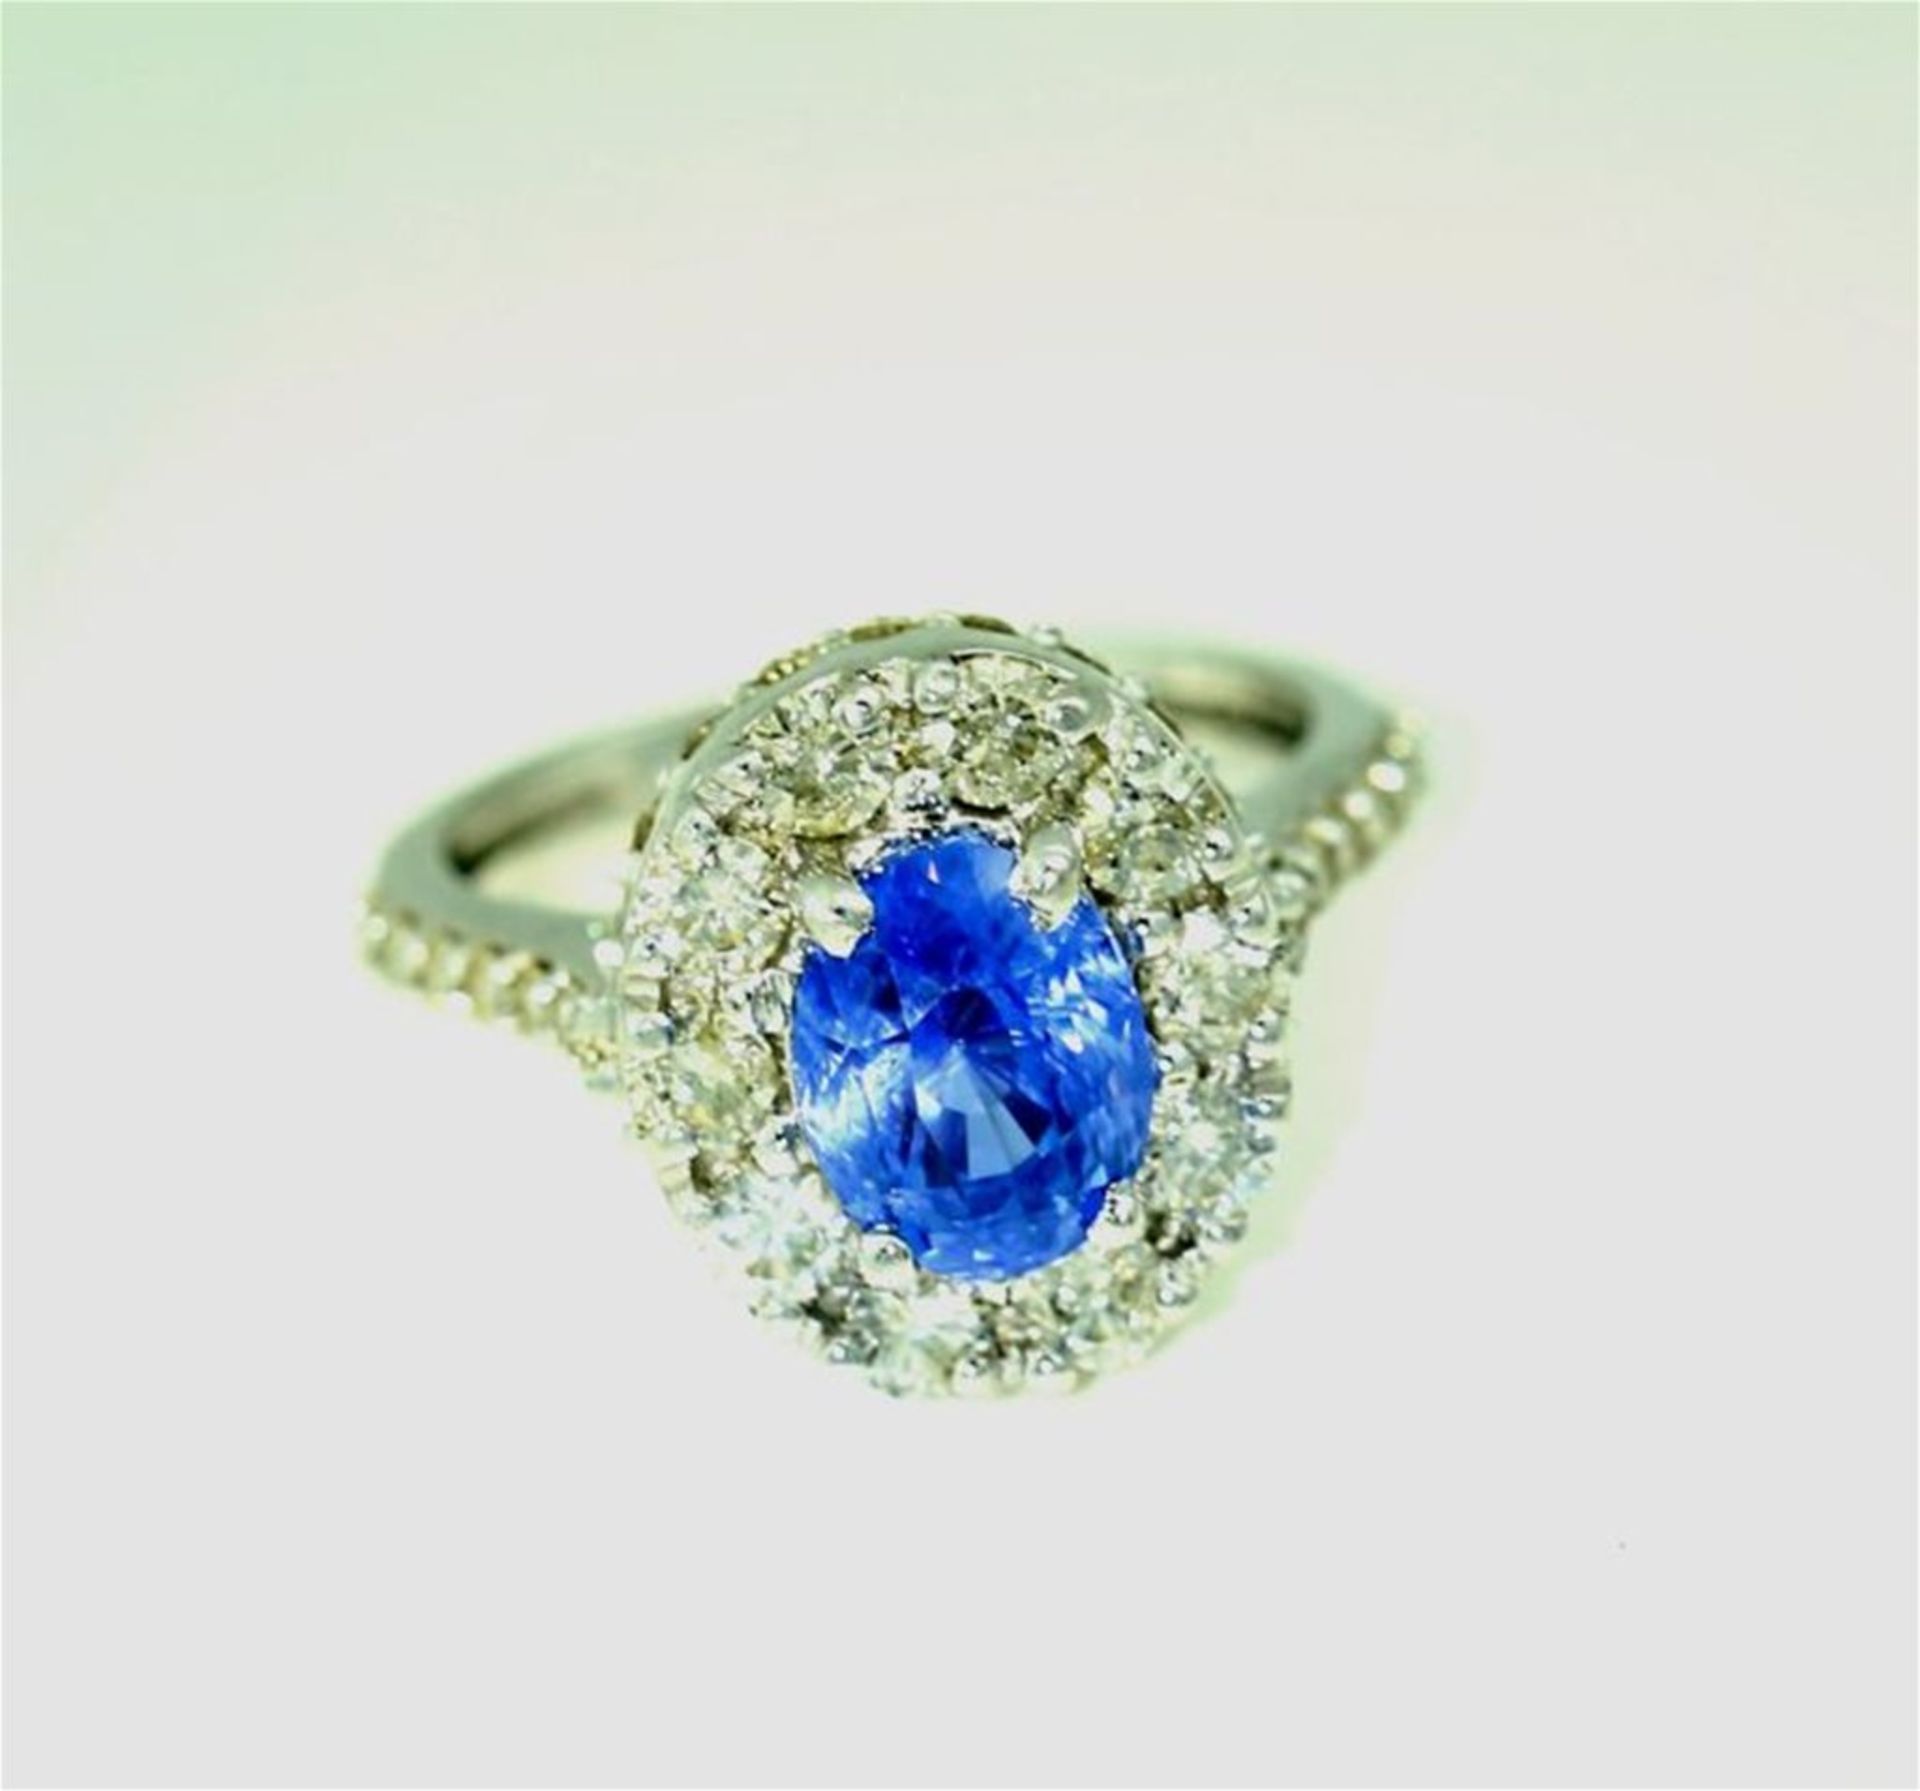 14 K / 585 White Gold Blue Sapphire (IGI certified) and Diamond Ring - Image 3 of 10